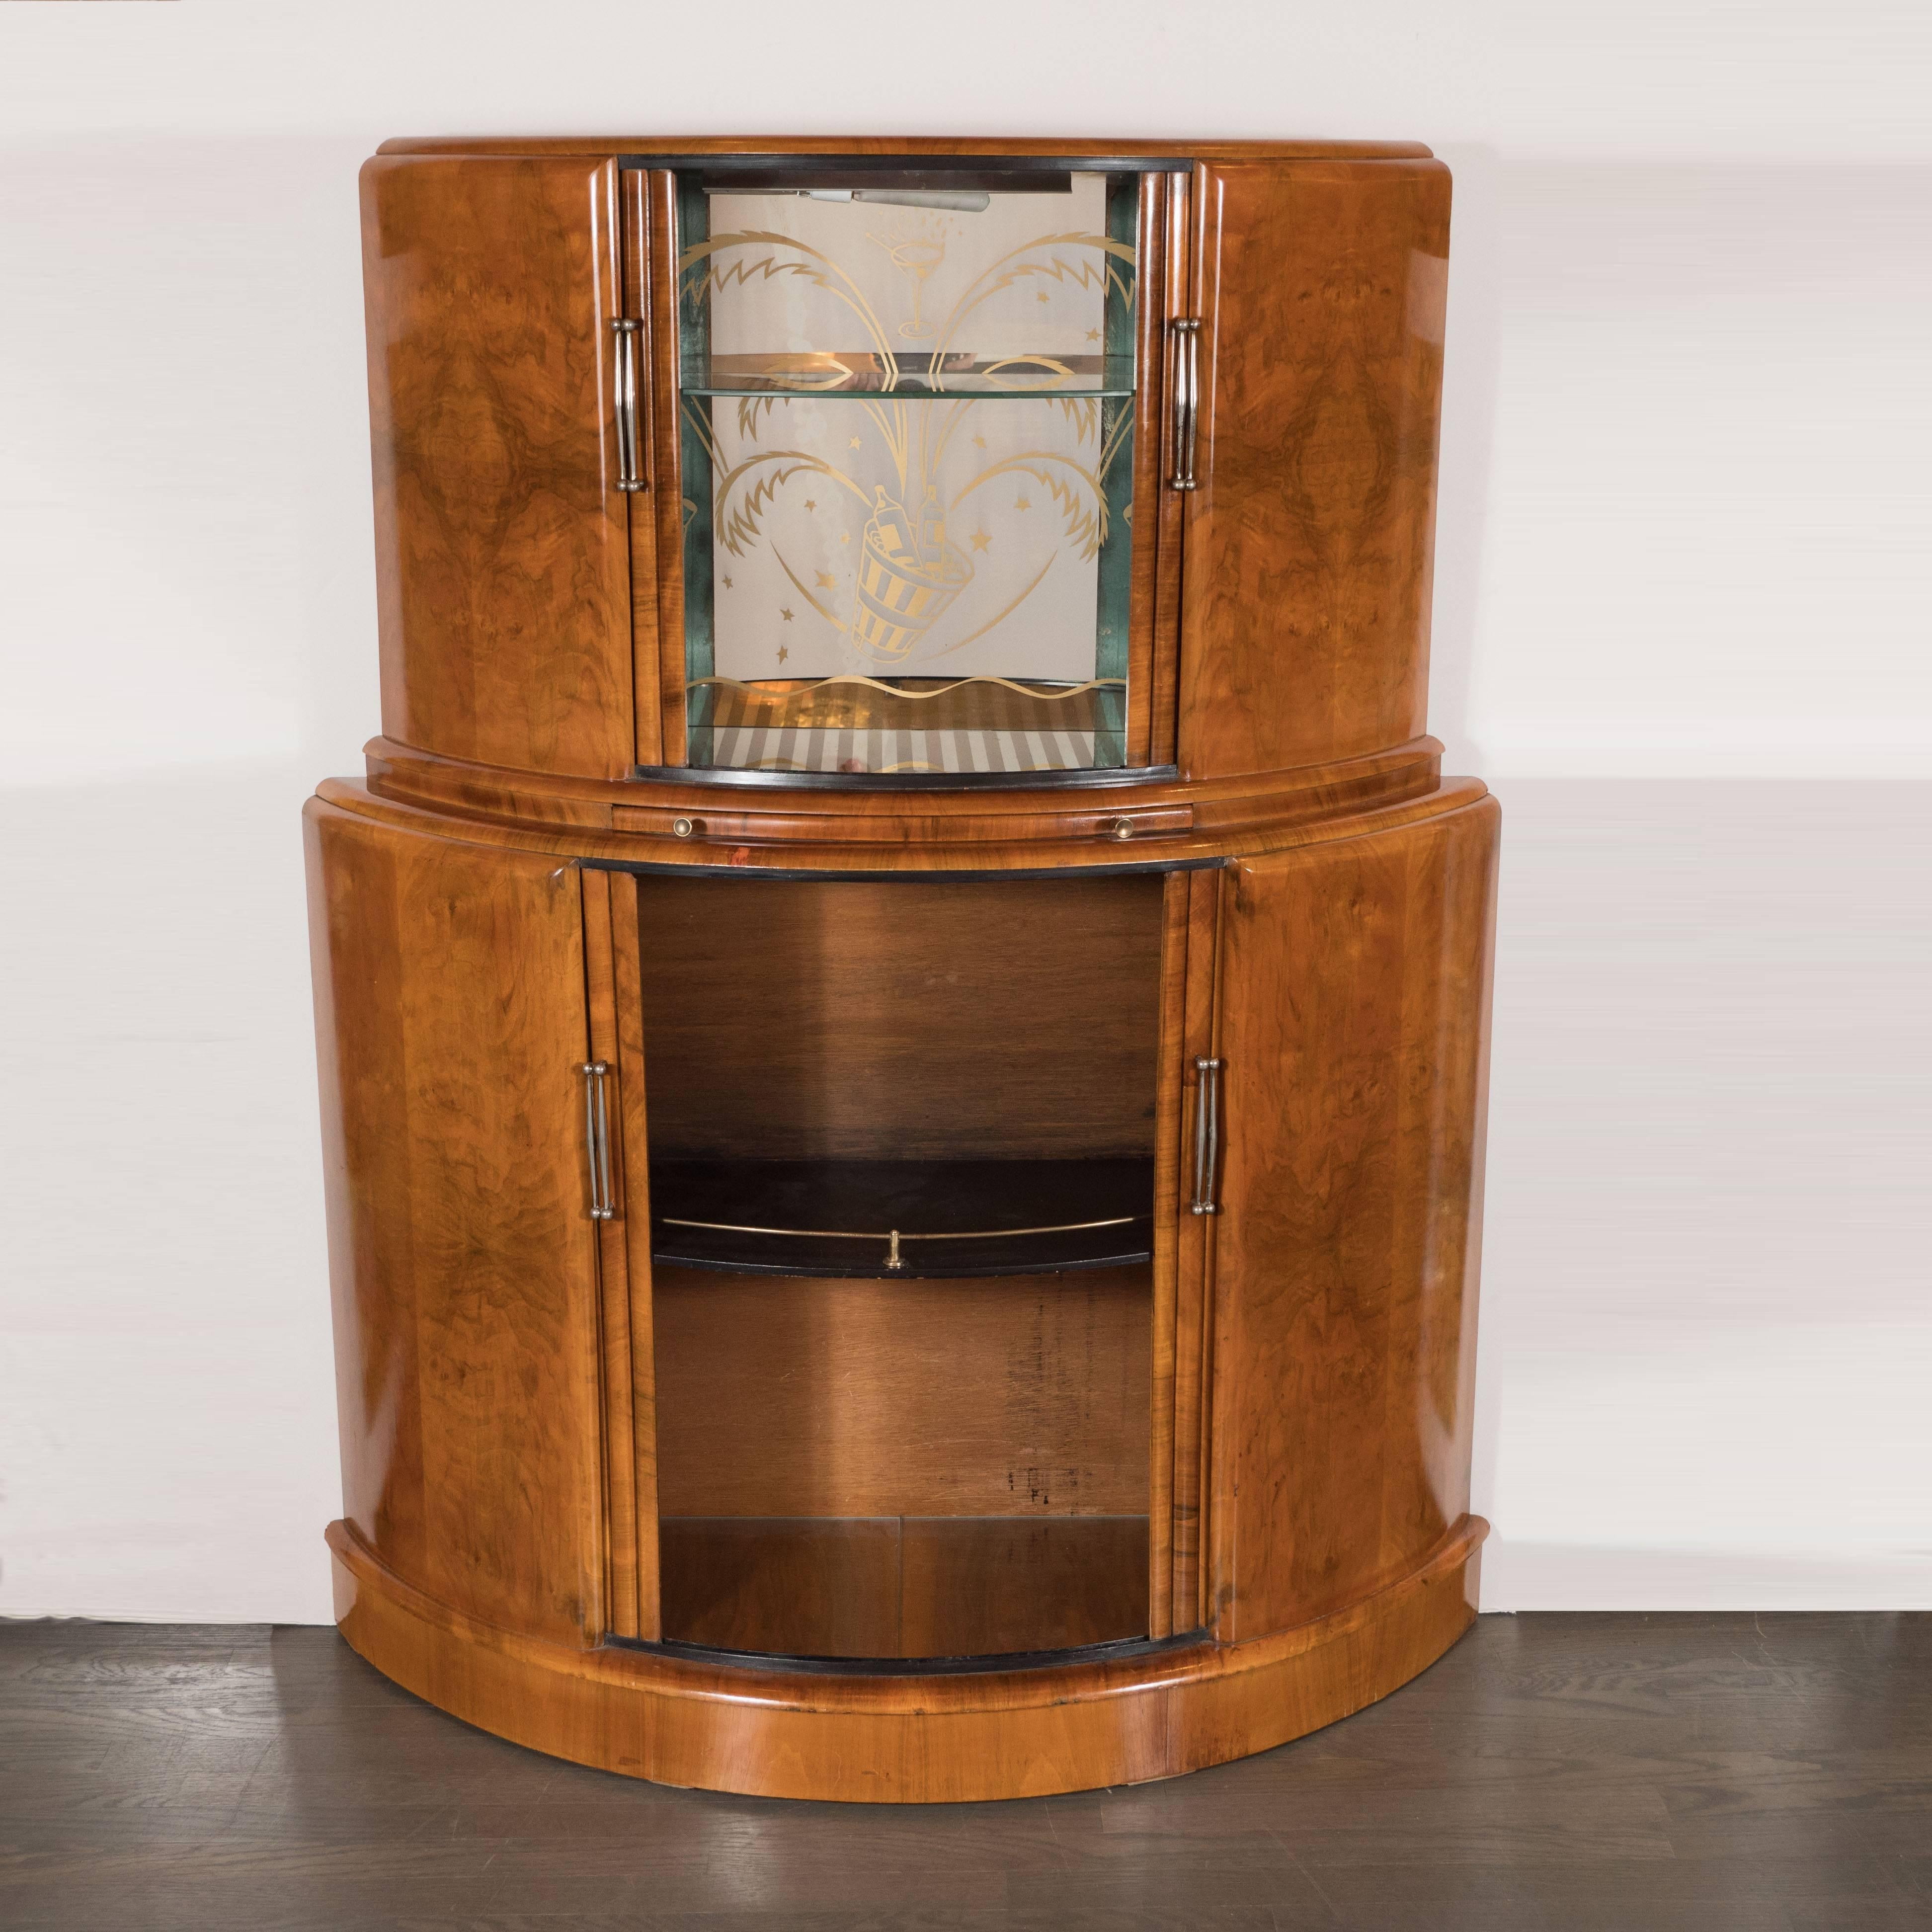 This Art Deco streamlined Skyscraper style tambour bar cabinet was realized in the England, circa 1935. It offers a tiered demilune form with two spacious compartments. The lower compartment has a black enamel shelf with a brass rail, while the